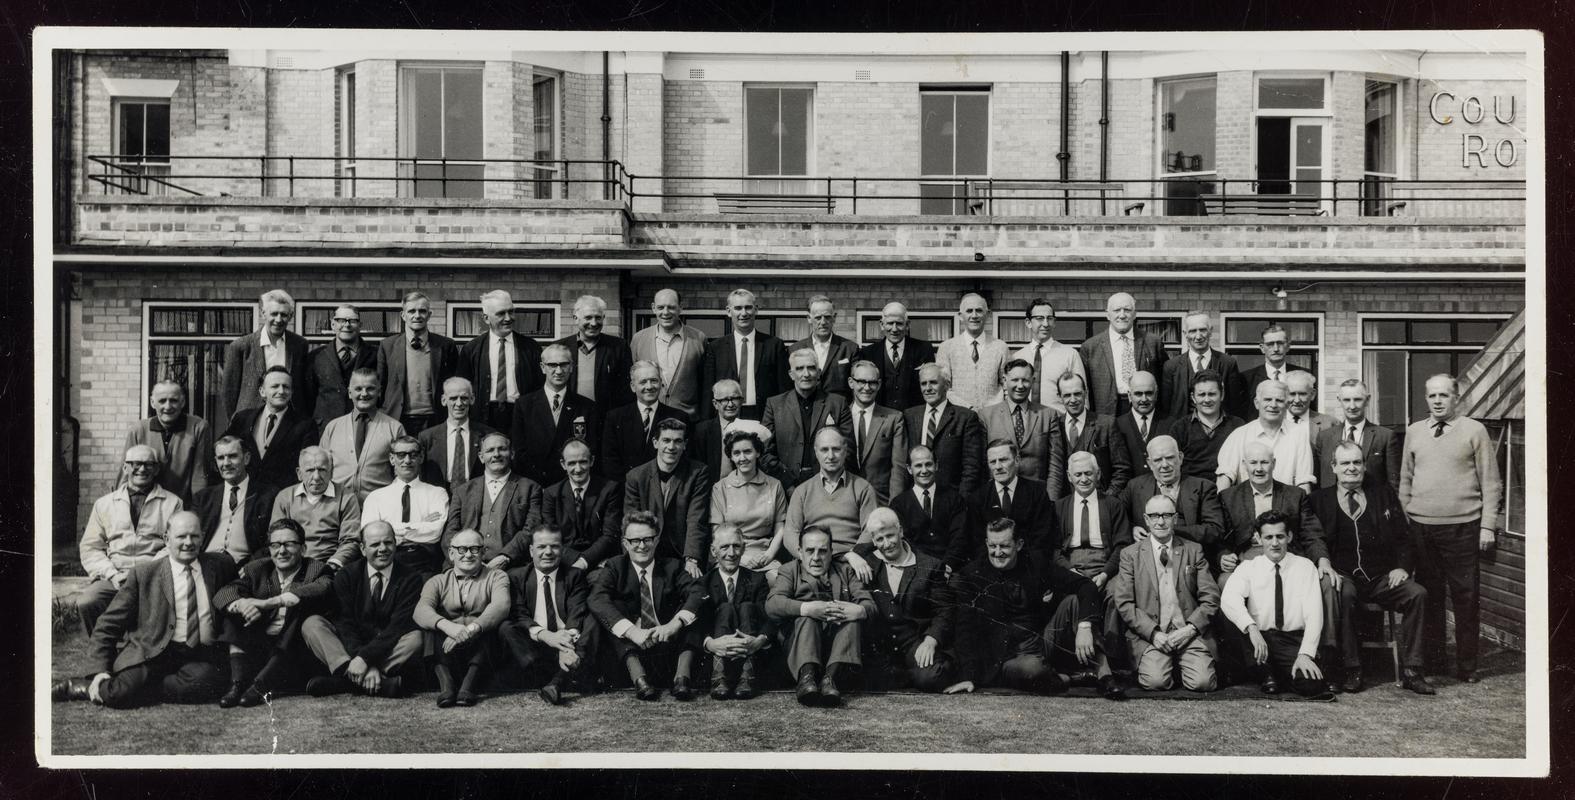 Black and white photograph showing large group of convalescing miners at Court Royal, Bournemouth, the convalescent home for the South Wales mining industry.